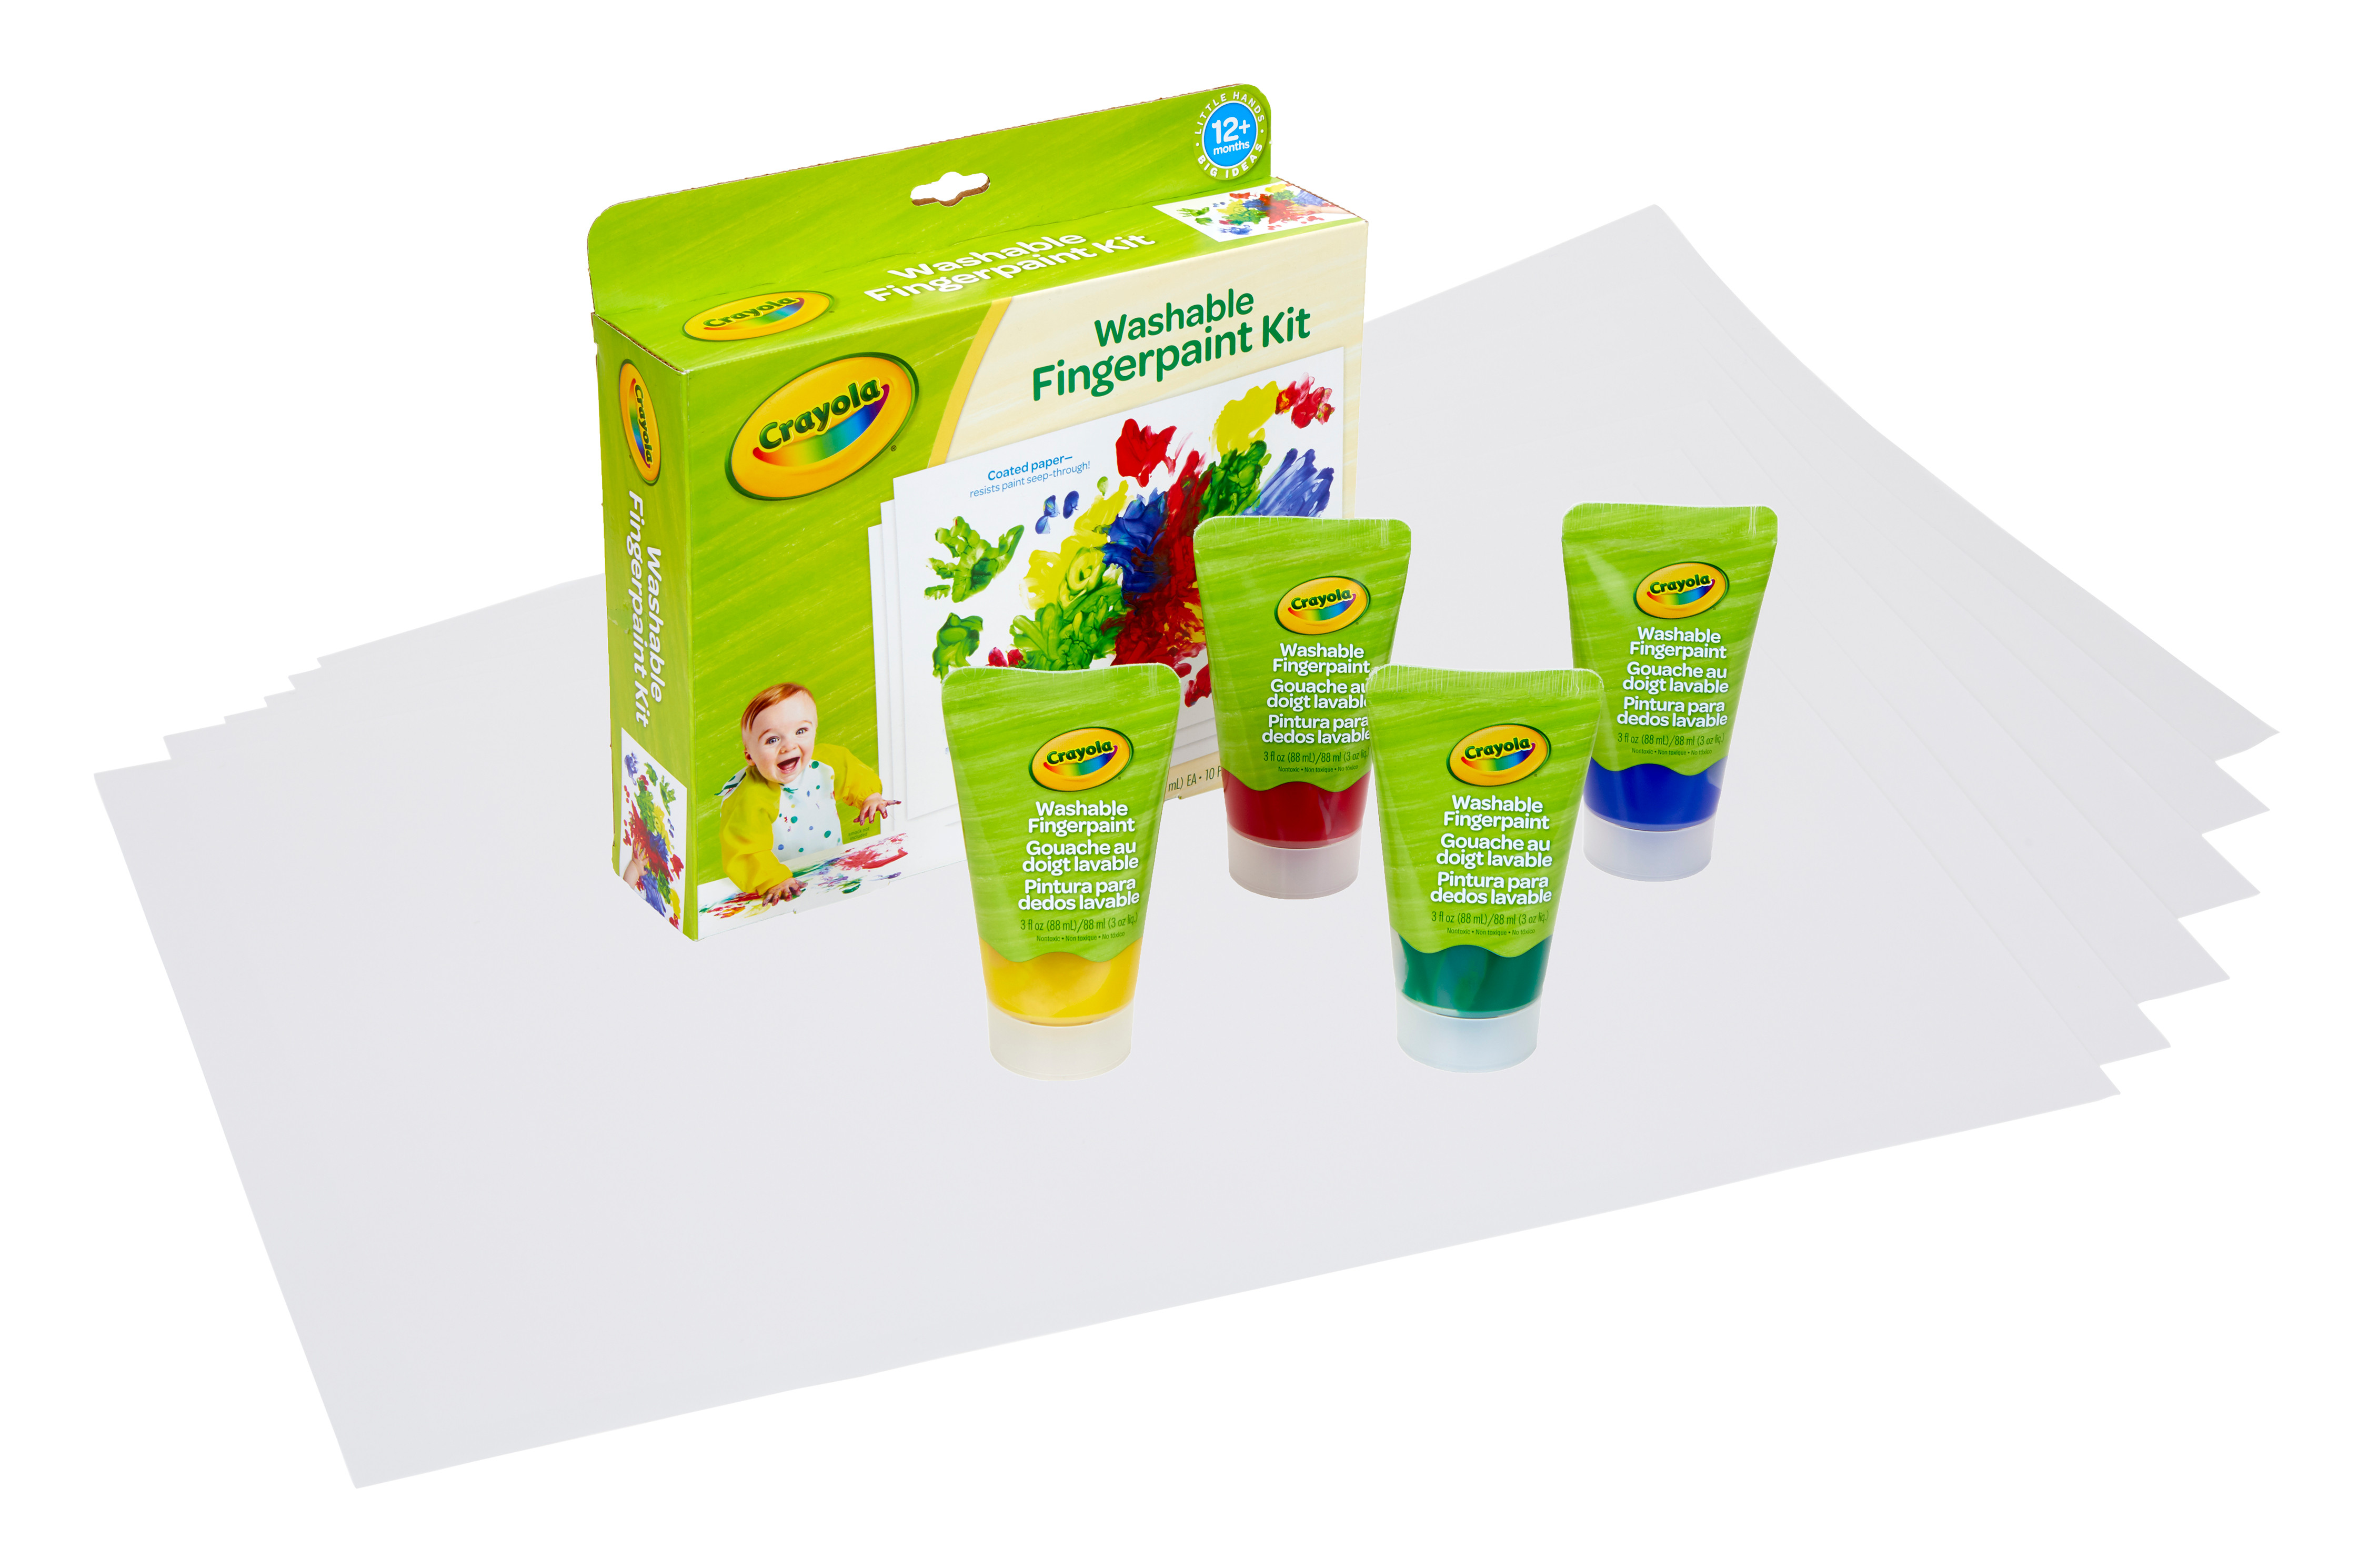 Crayola Washable Finger Paint Set, Toddler Paint Kit, 4 Tubes of Paint, 10 Sheets of Paper, Gift - image 4 of 8